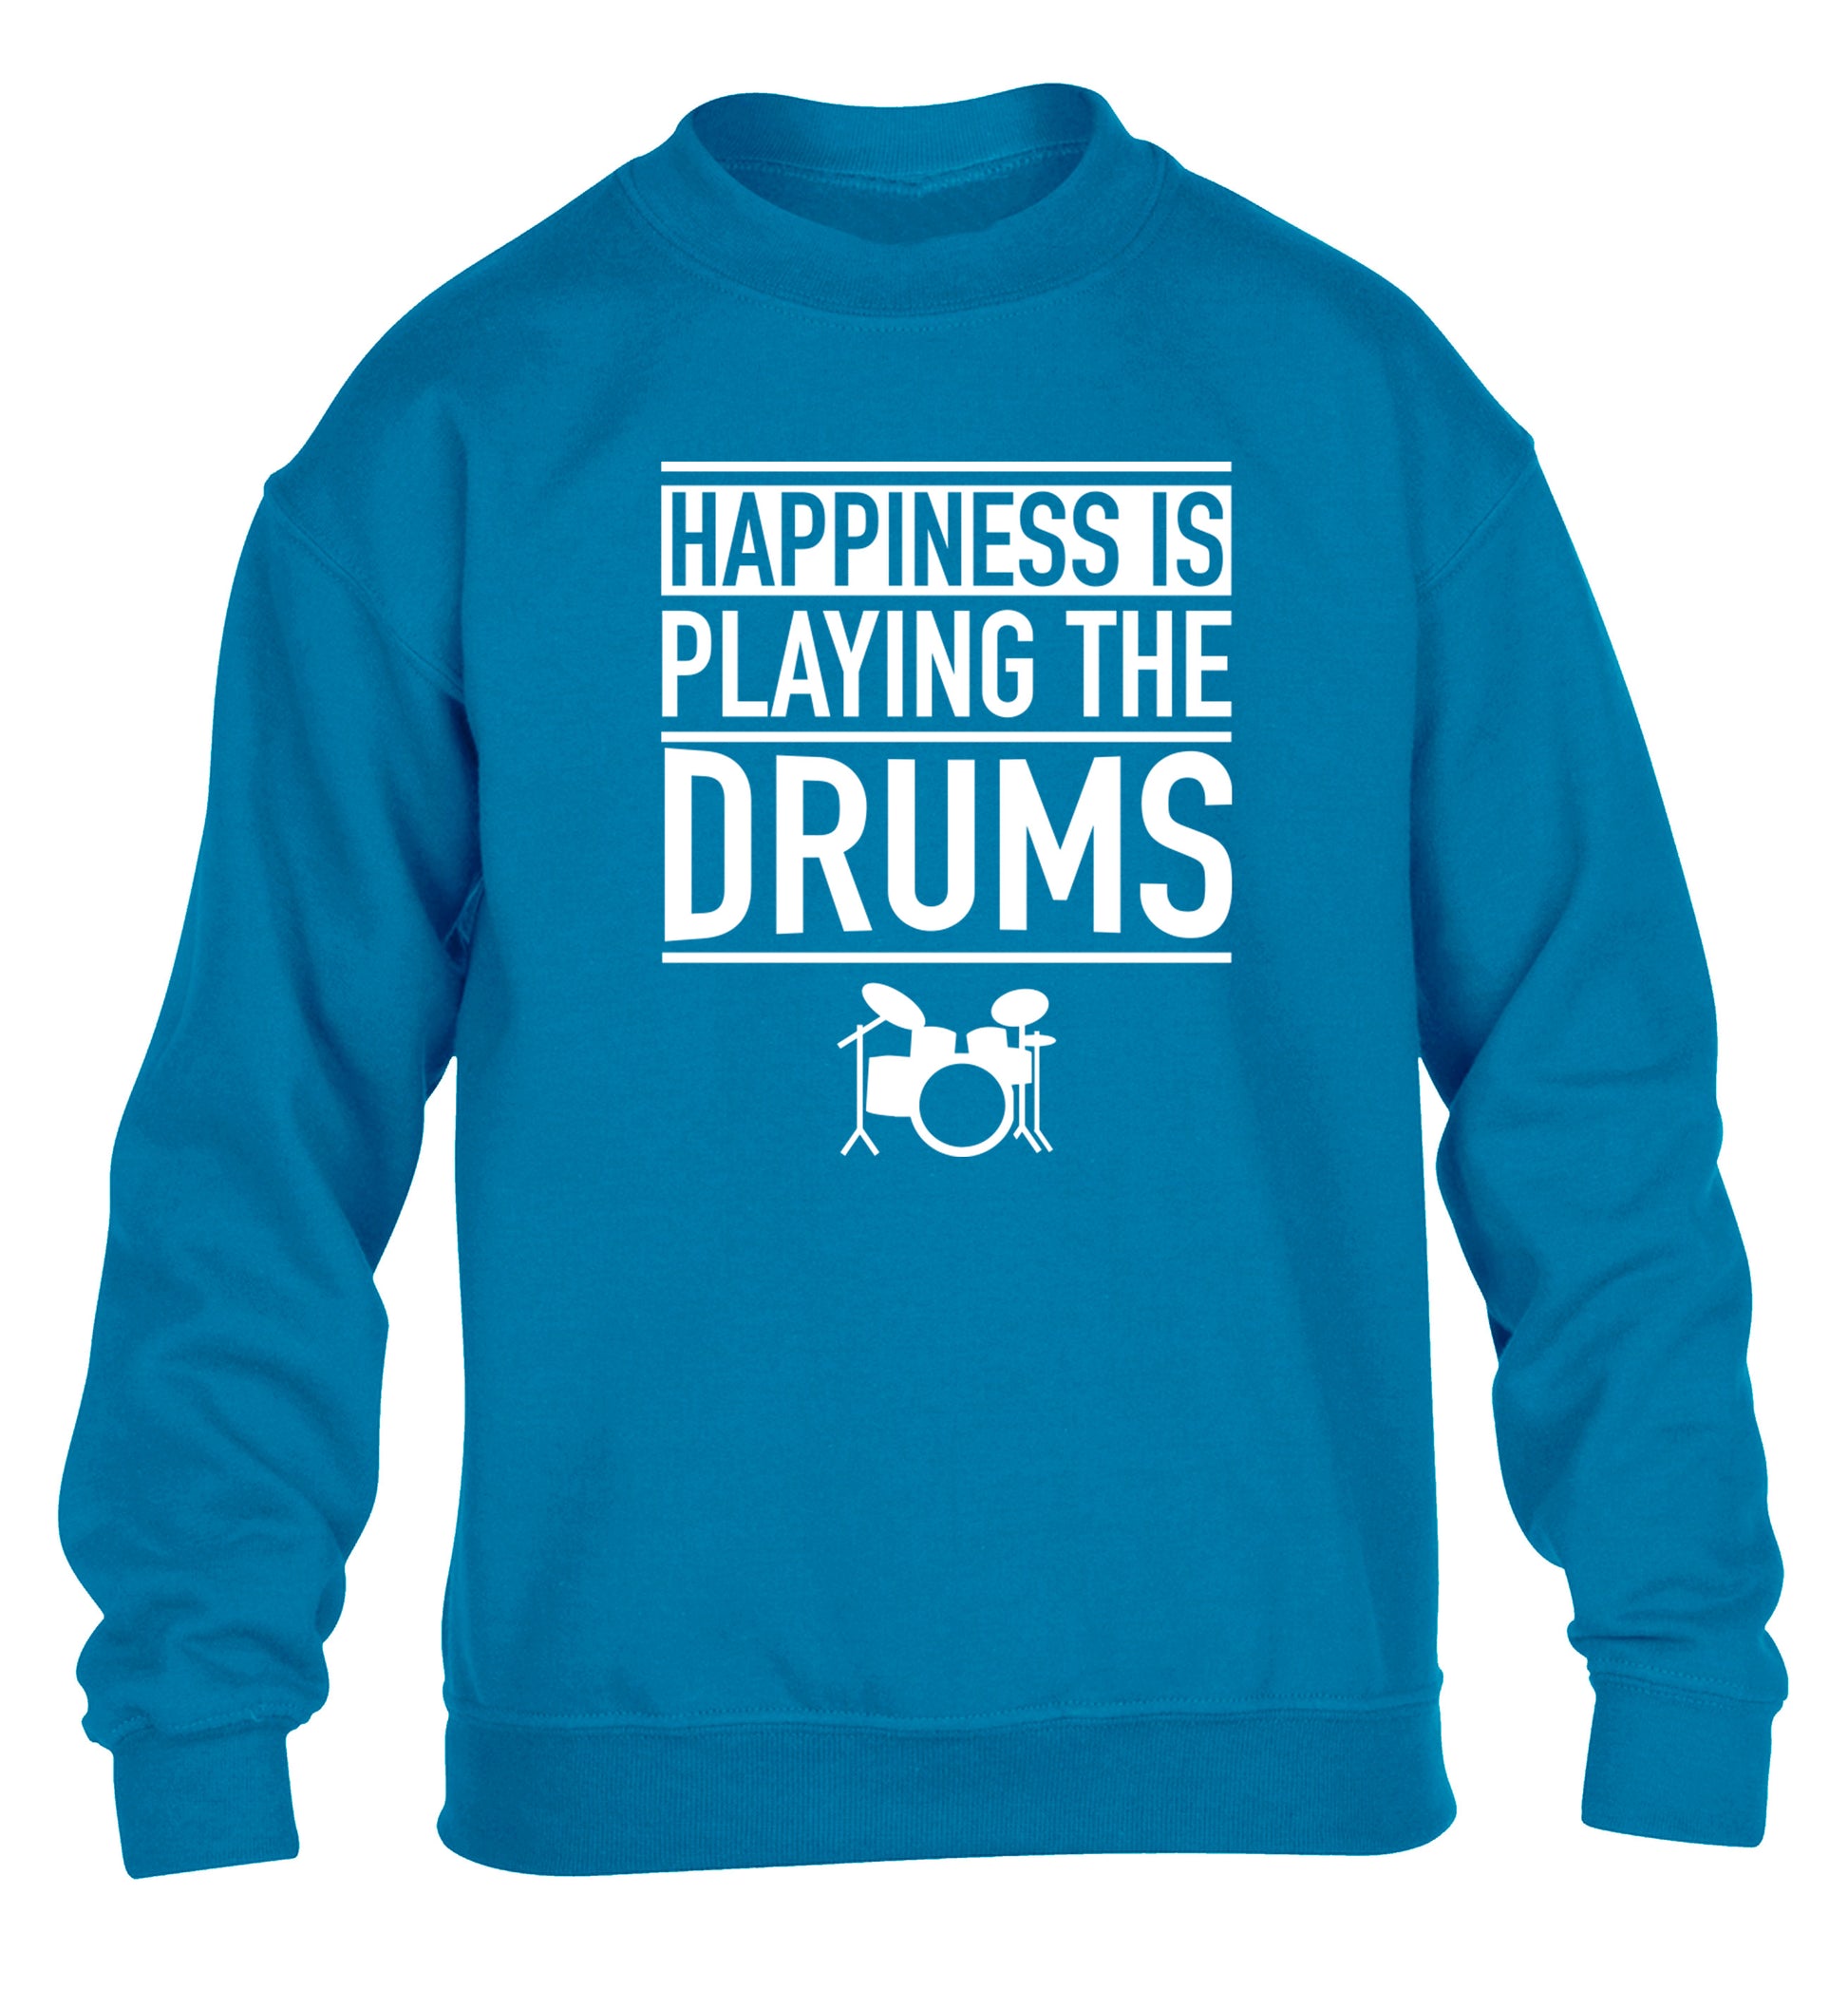 Happiness is playing the drums children's blue sweater 12-14 Years